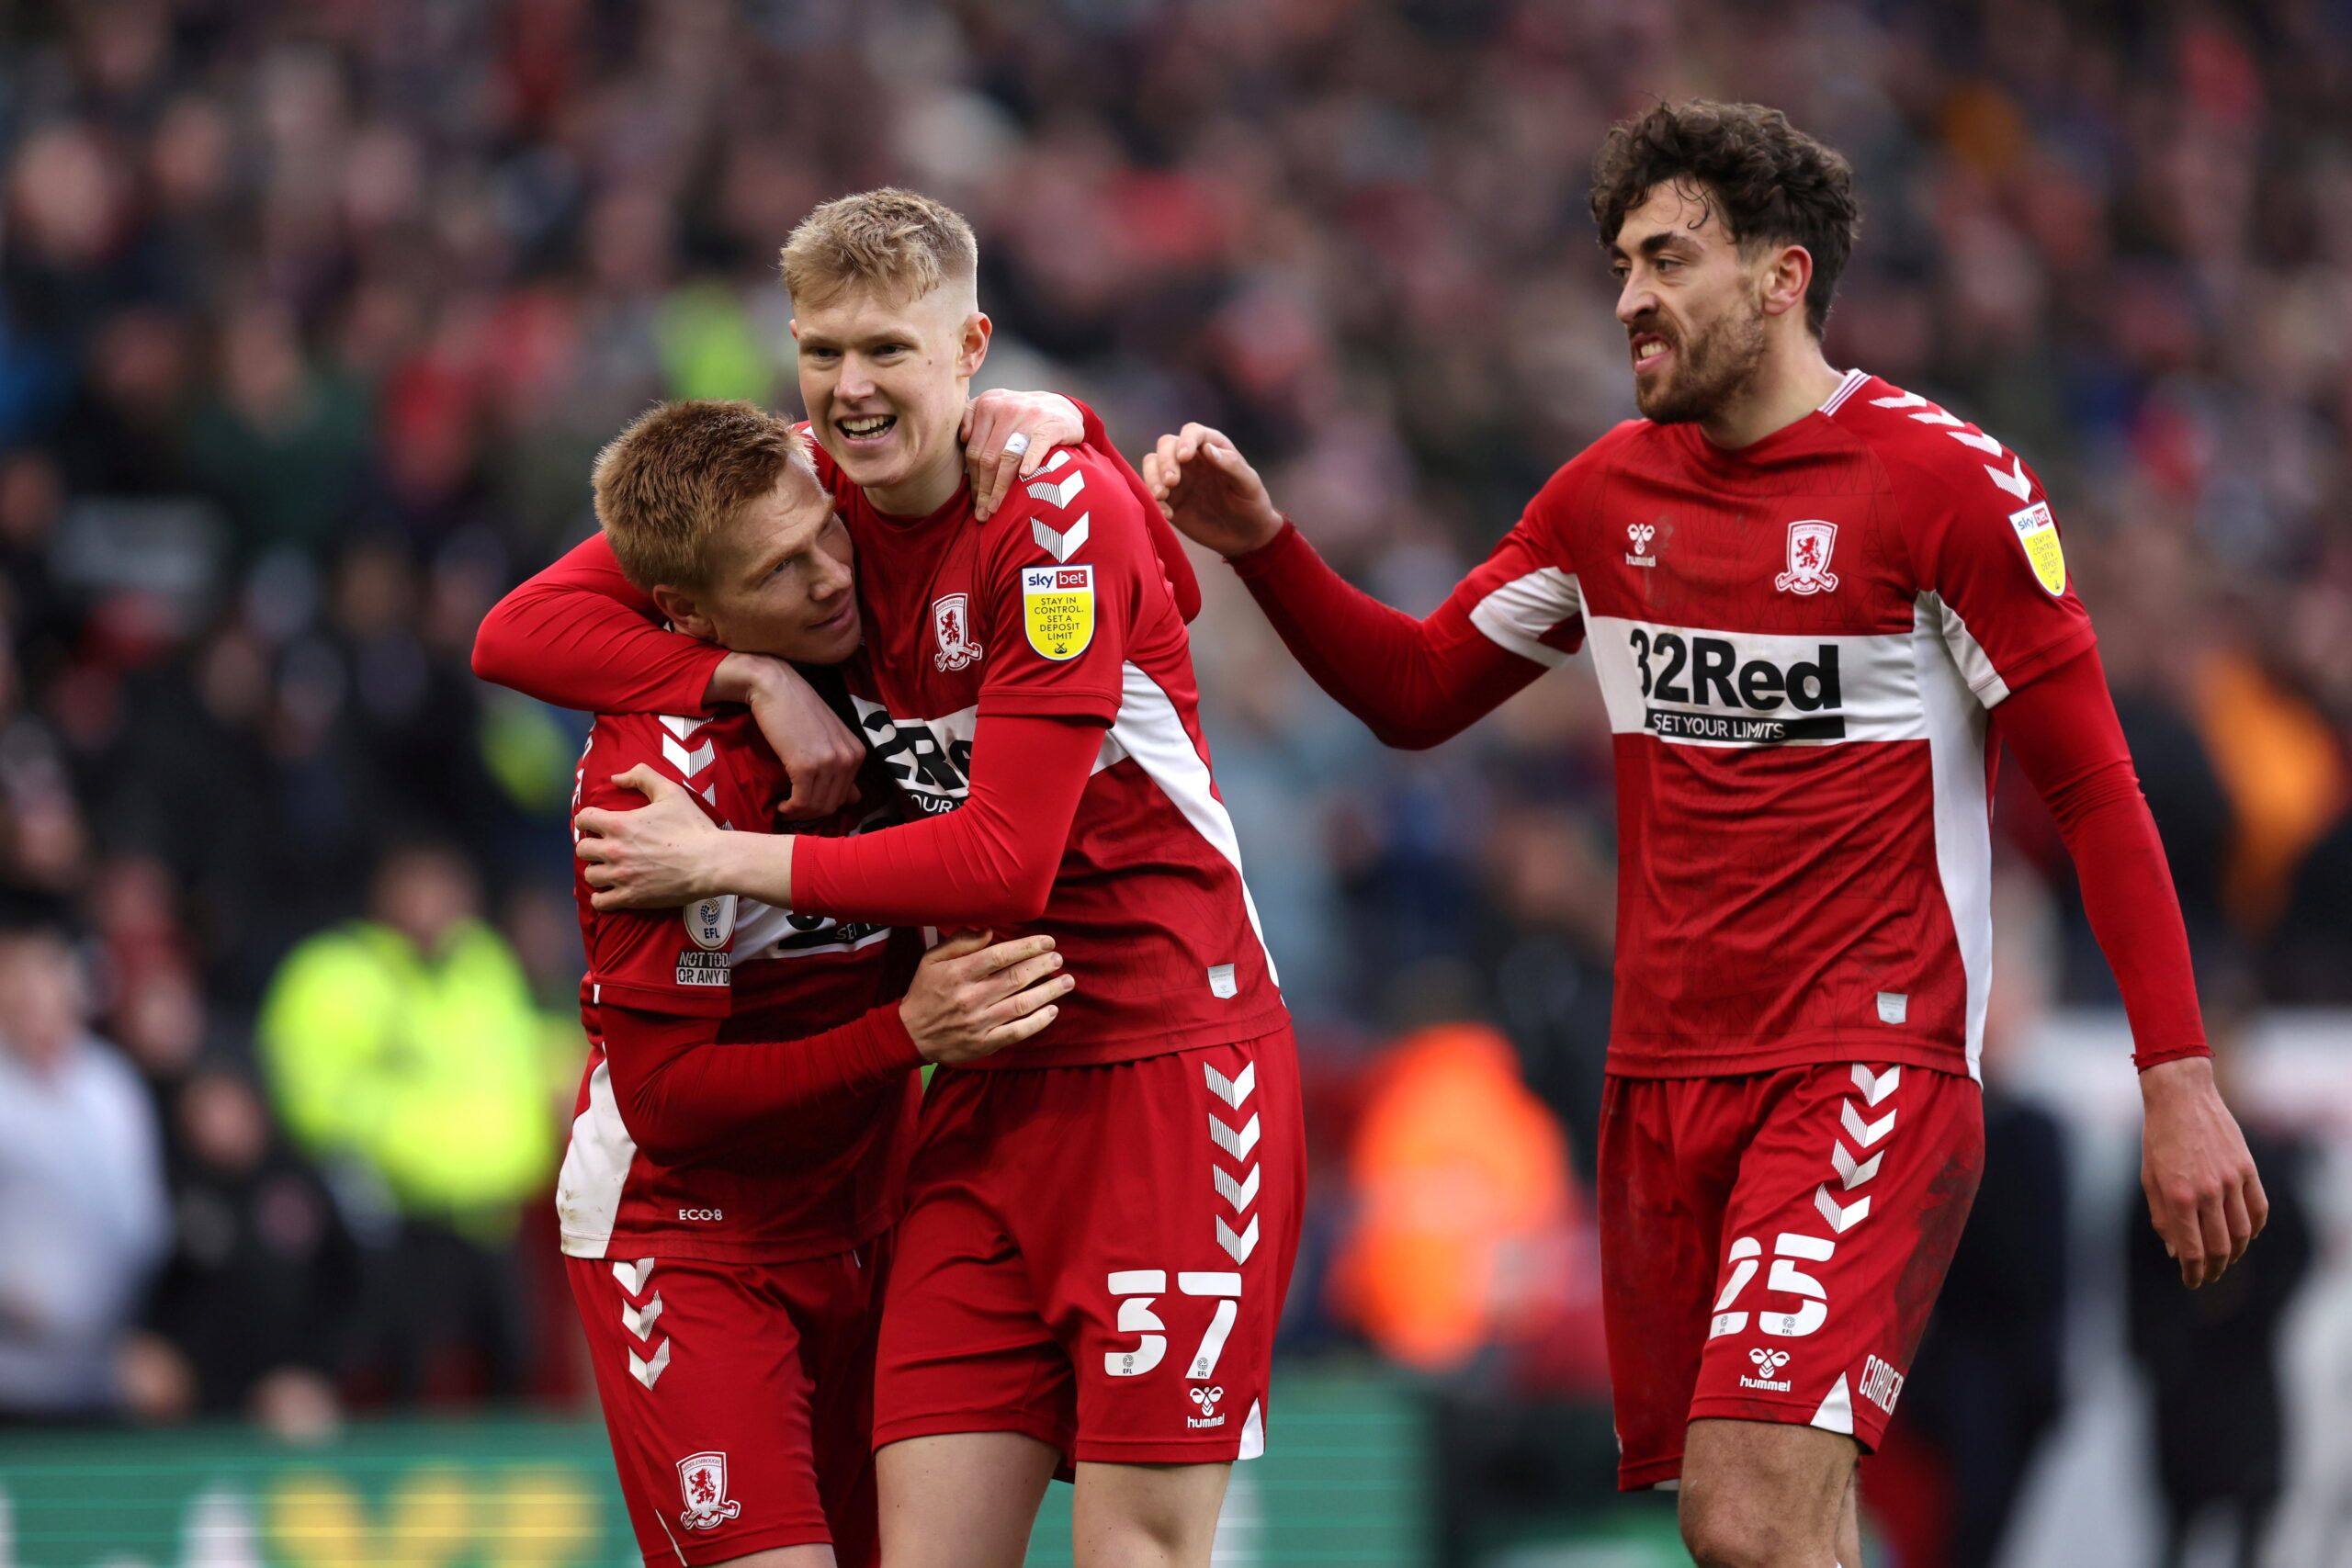 Soccer Football - Championship - Middlesbrough v Luton Town - Riverside Stadium, Middlesbrough, Britain - March 5, 2022  Middlesbrough's Duncan Watmore celebrates scoring their second goal with Josh Coburn and Matt Crooks  Action Images/John Clifton  EDITORIAL USE ONLY. No use with unauthorized audio, video, data, fixture lists, club/league logos or 